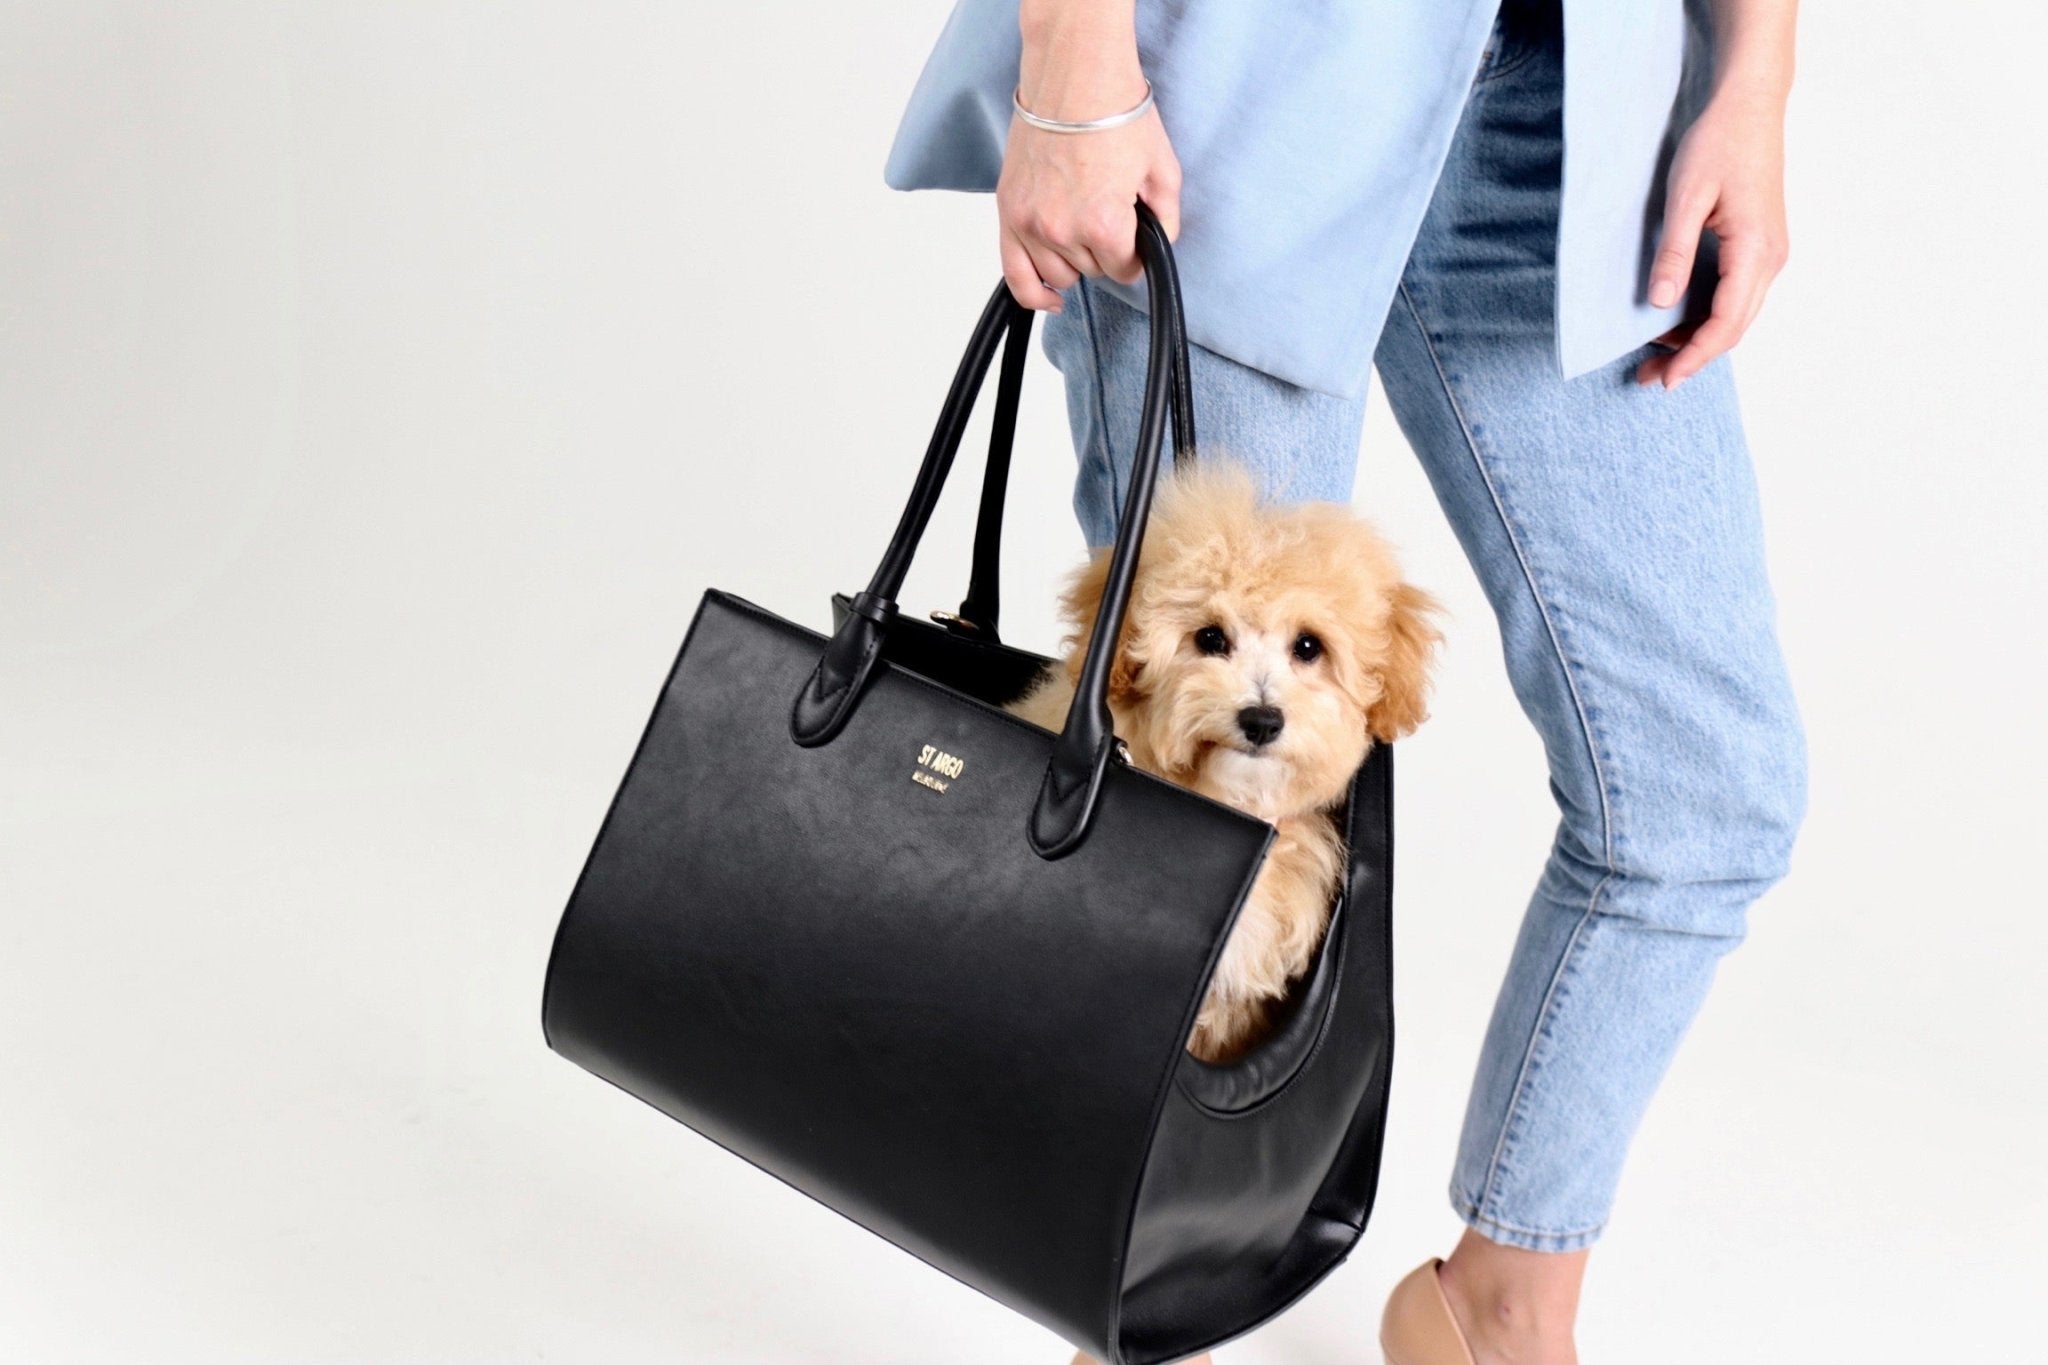 🌟 Do you want to take your small dog with you everywhere you go? Find out  how to choose the best dog carrier sling for your pup and check out our top